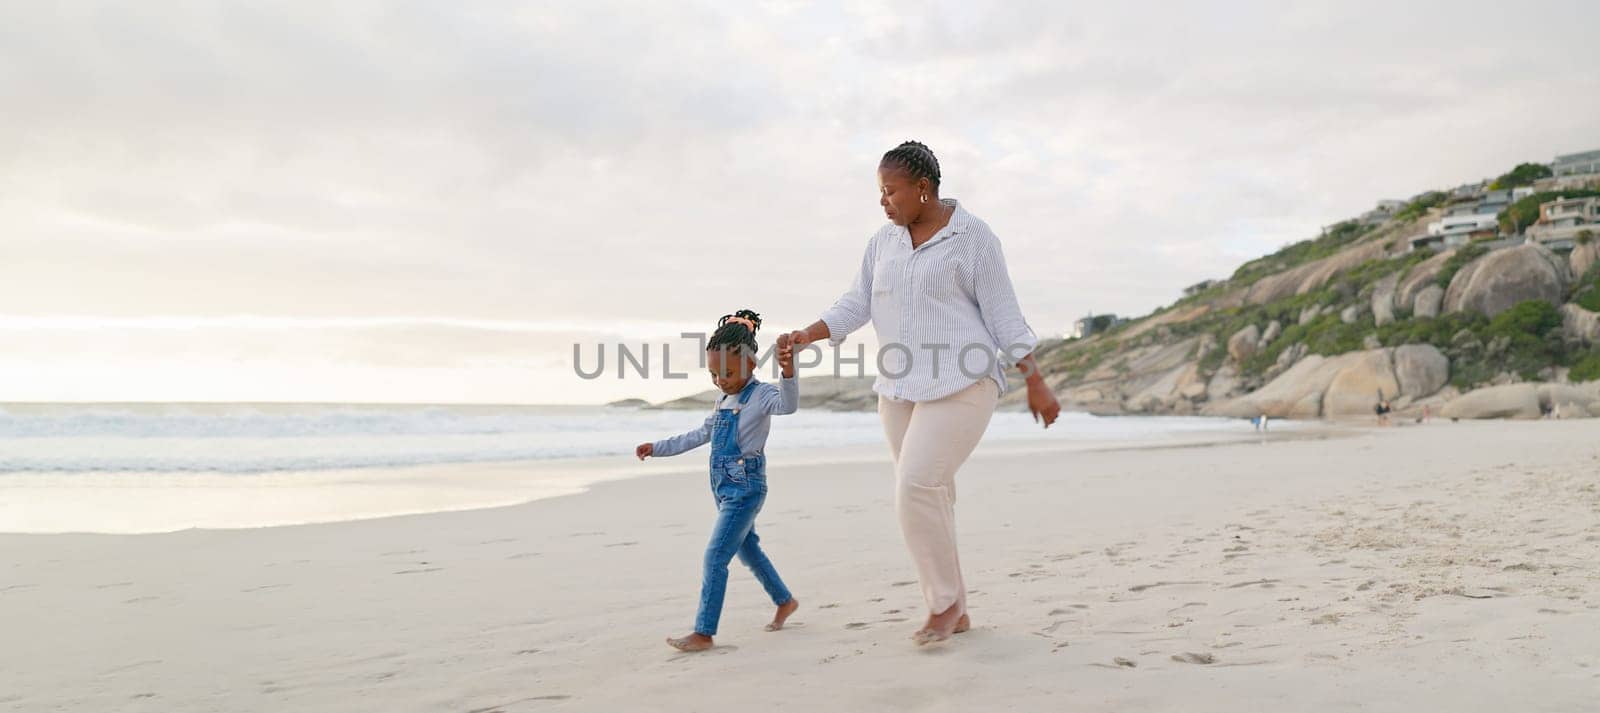 Black family, mother and daughter holding hands, walk on beach and bonding with love and care outdoor. Happiness, freedom and travel, woman and young girl on holiday with trust and support in nature.